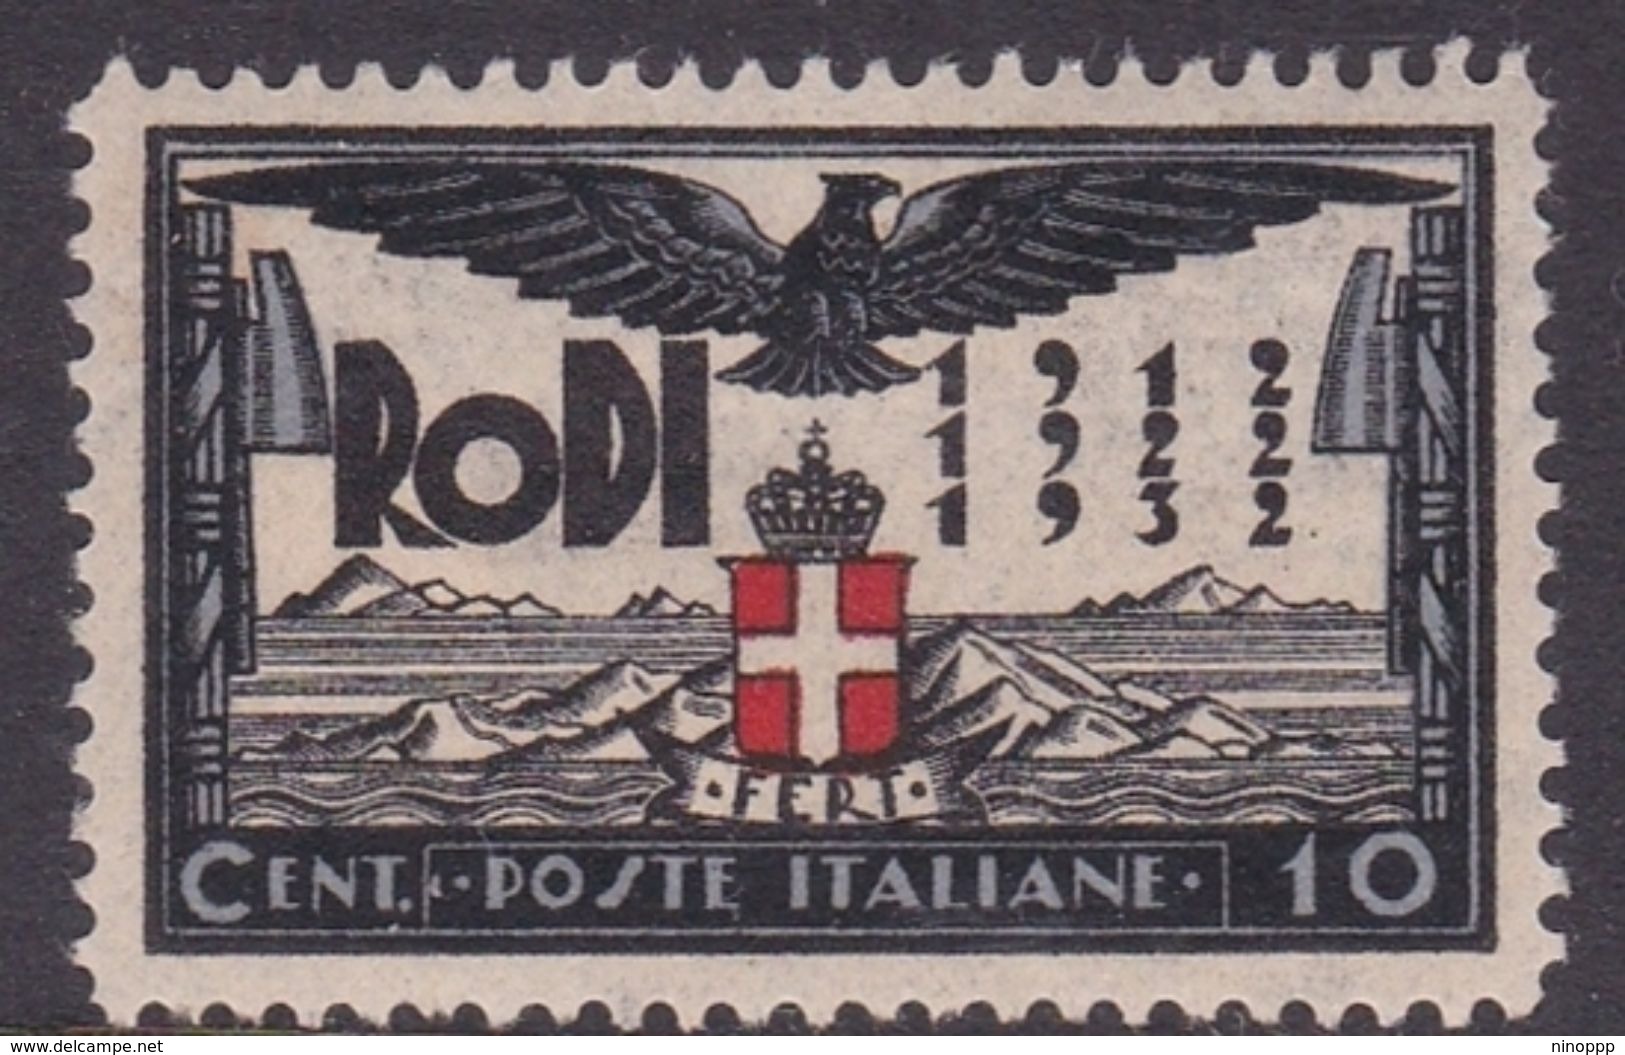 Italy-Colonies And Territories-Aegean General Issue-Rodi S66 20th Anniversary Of The Italian Occupation,10c Black & Blue - Algemene Uitgaven